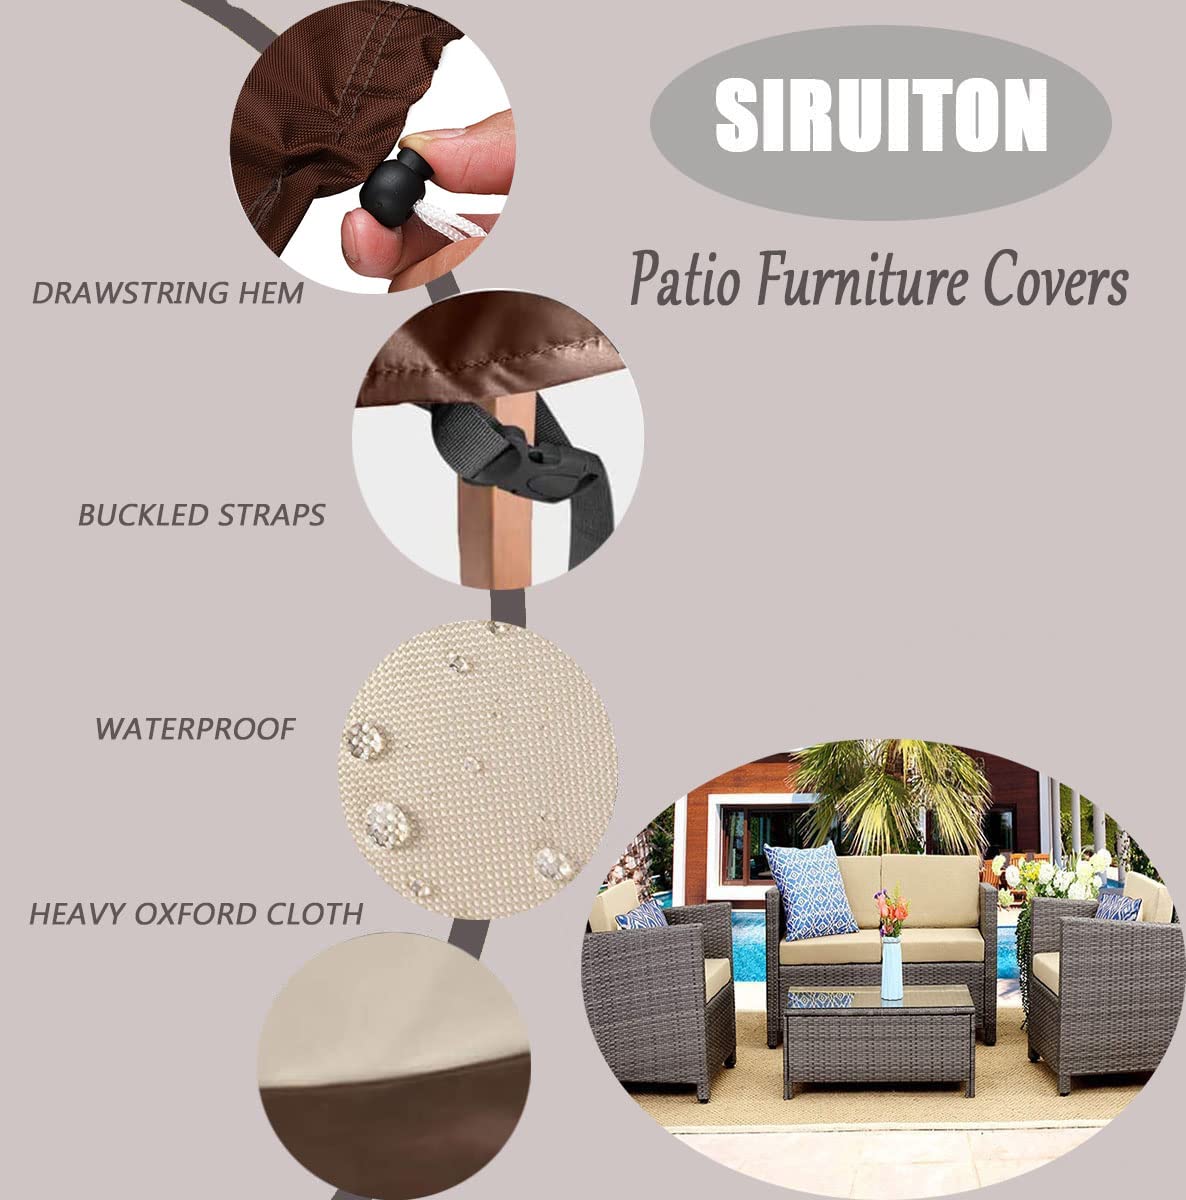 SIRUITON Patio Furniture Cover Set ,Fit for 4 Pieces Patio Outdoor Rattan, Wicker Chair Conversation Furniture Sets,Heavy Duty Durable and Water Resistant Fabric (Yellow)